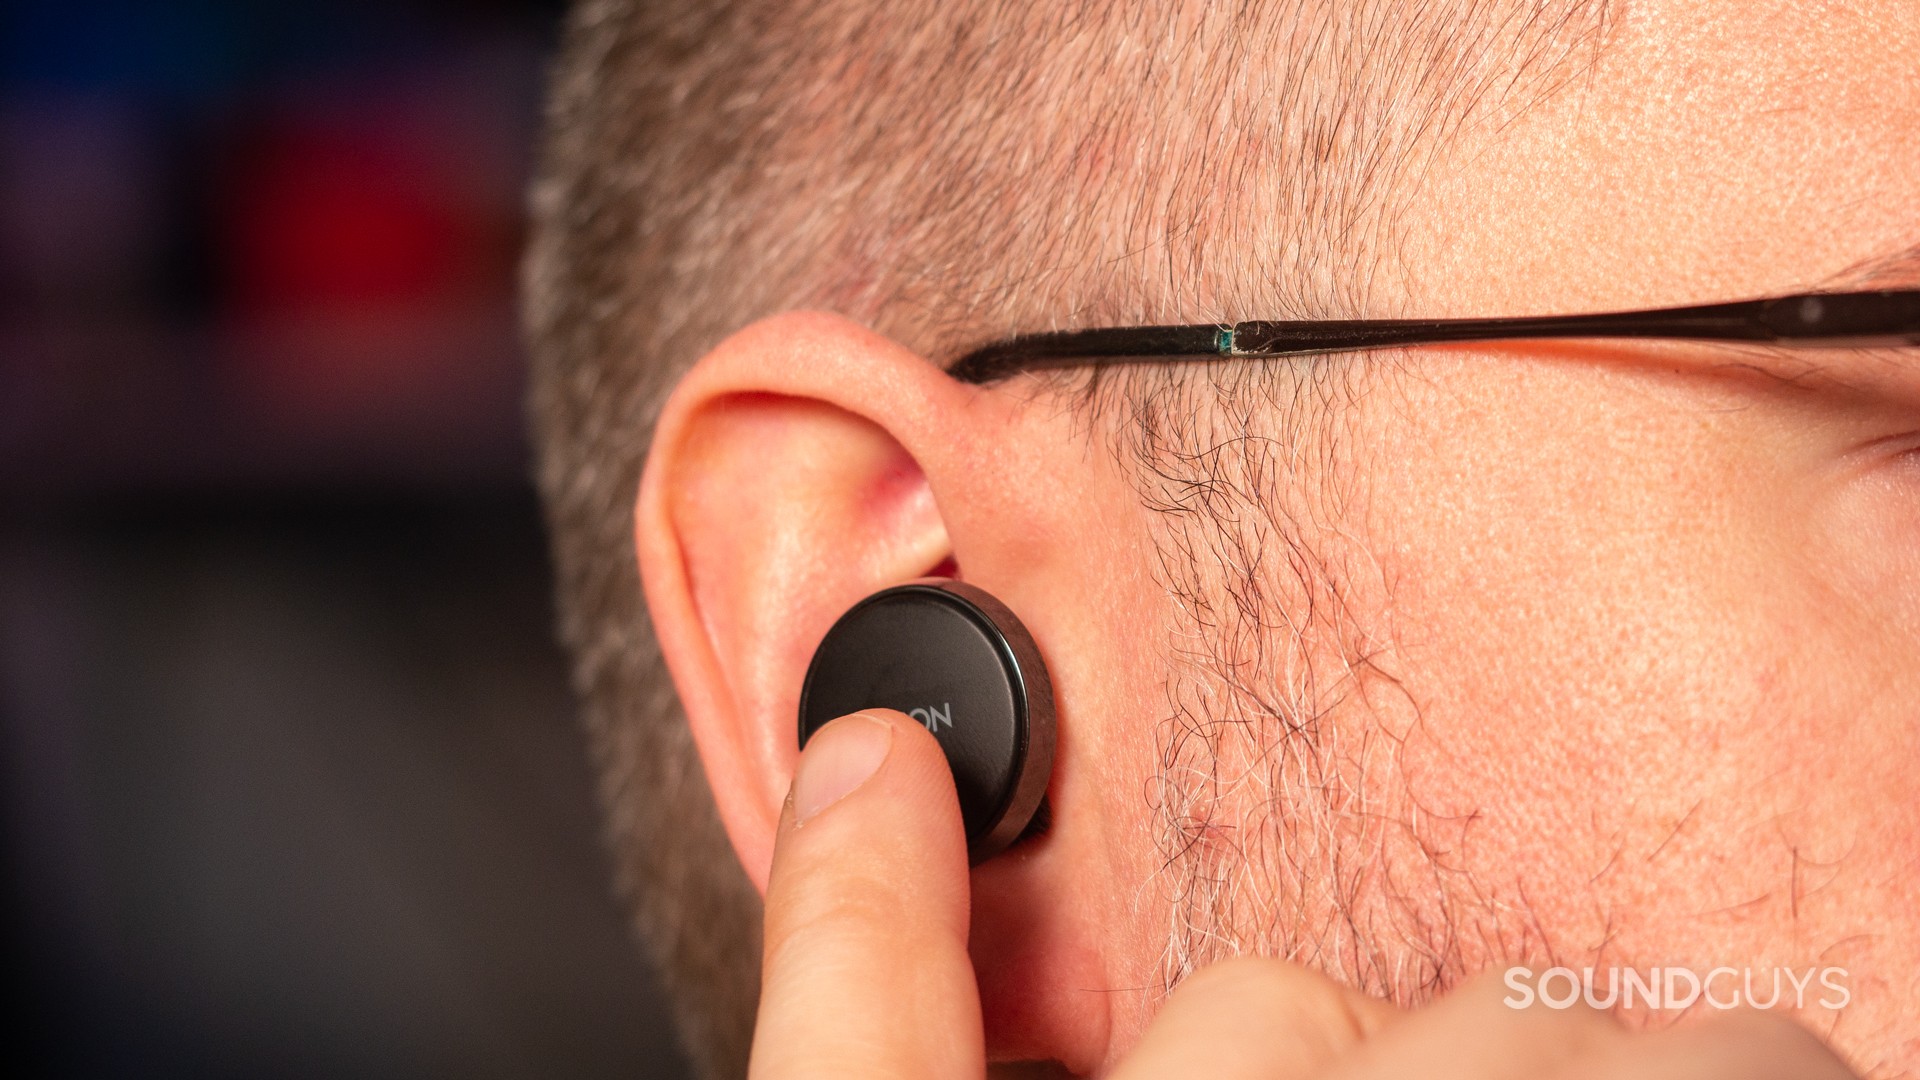 A close-up of a man controlling the Denon PerL Pro earbuds.